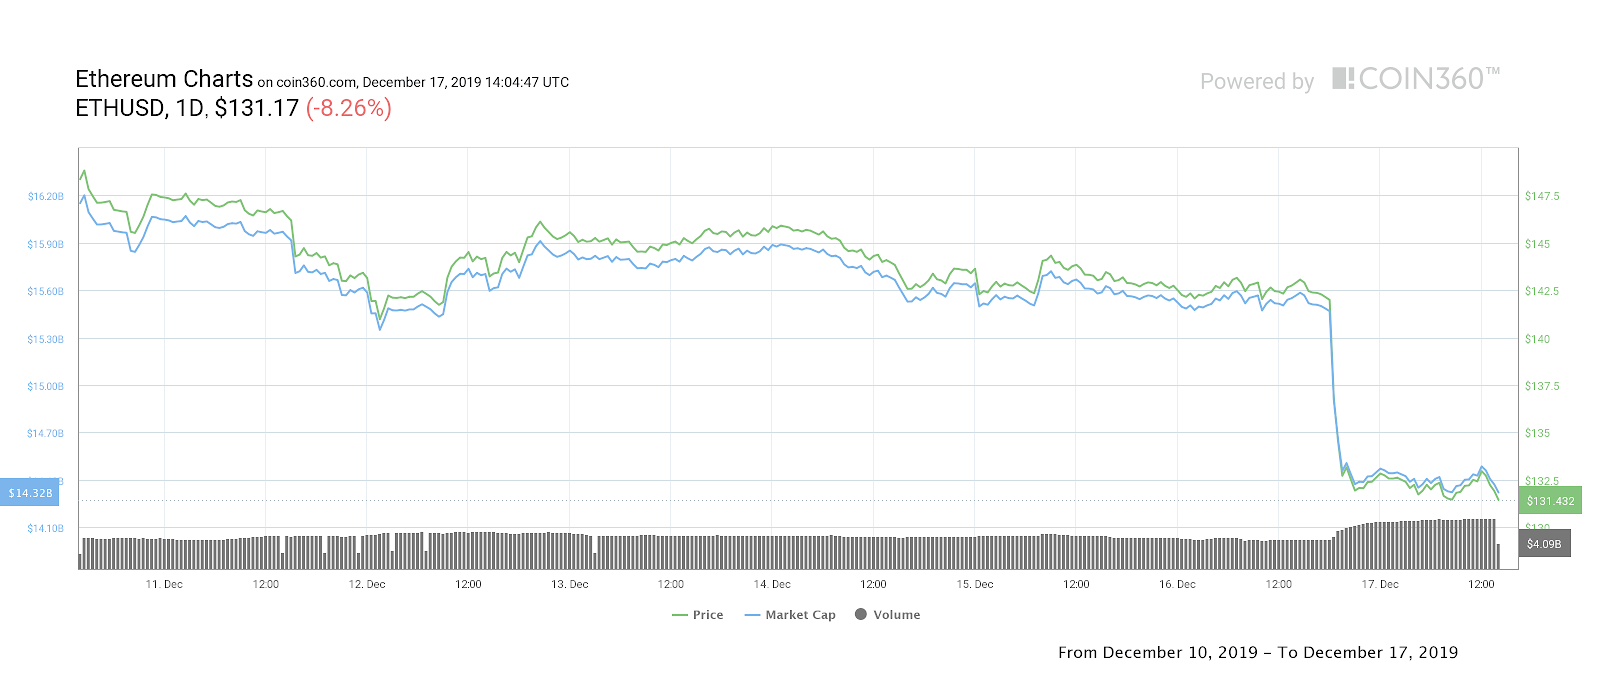 Ether 7-day price chart. Source: Coin360